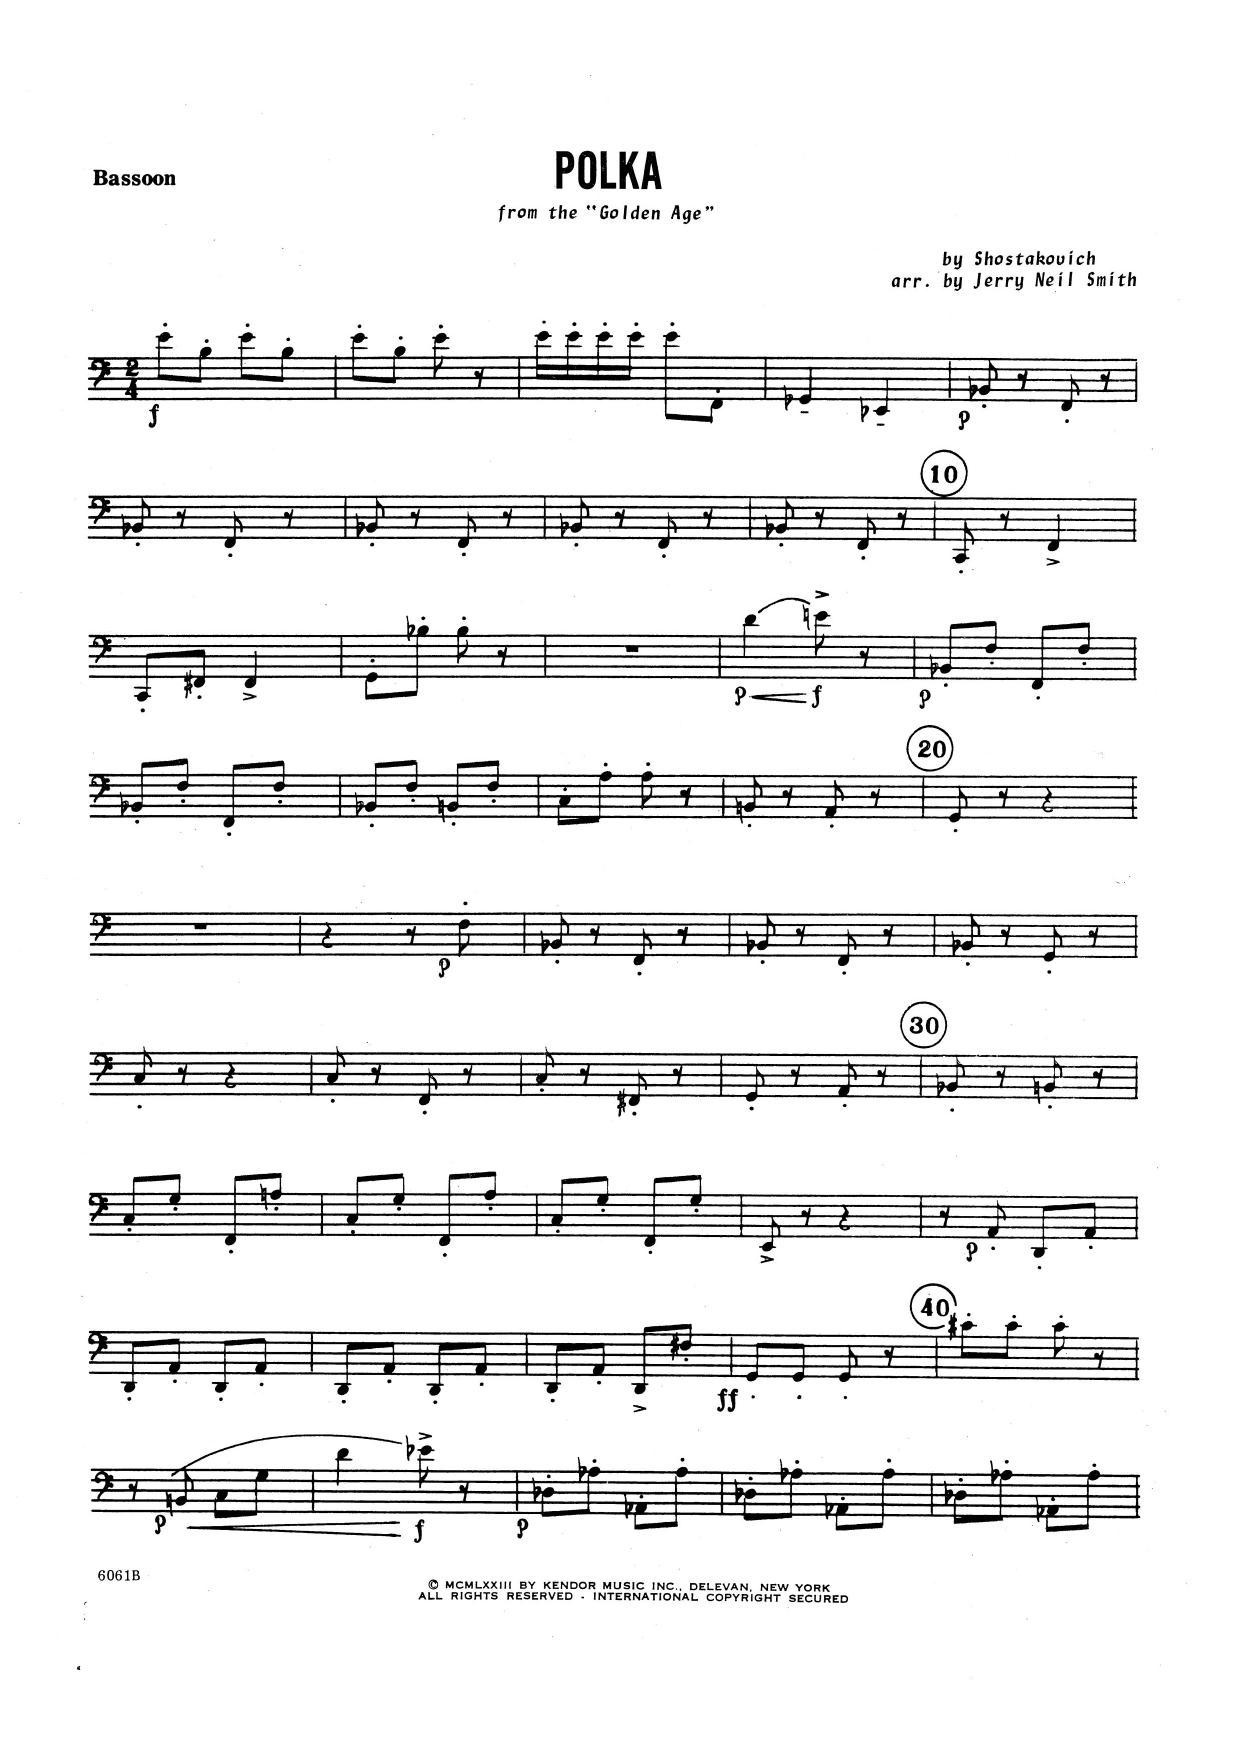 Download Jerry Smith Polka - Bassoon Sheet Music